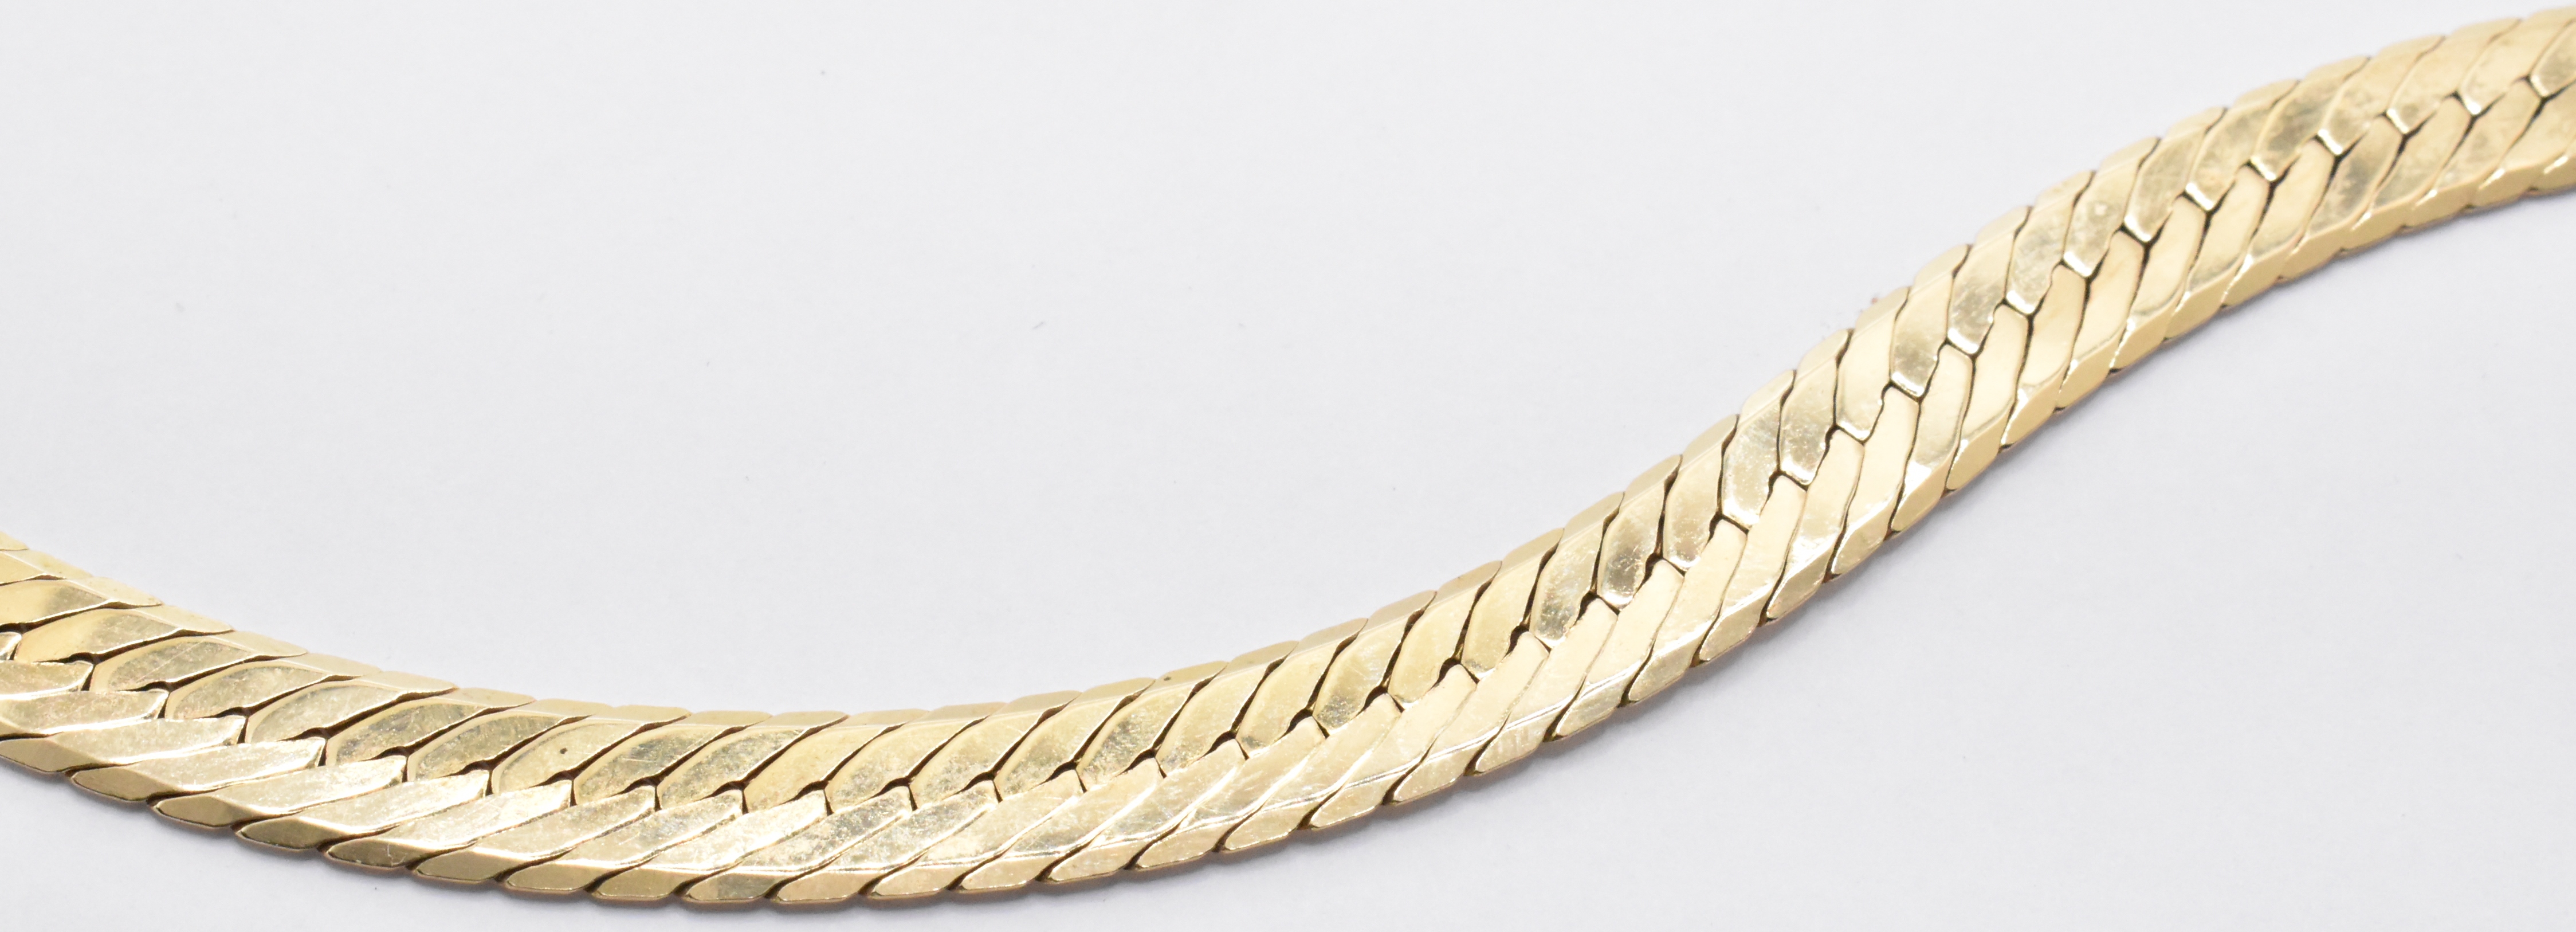 14CT GOLD FLAT SNAKE CHAIN NECKLACE - Image 5 of 11